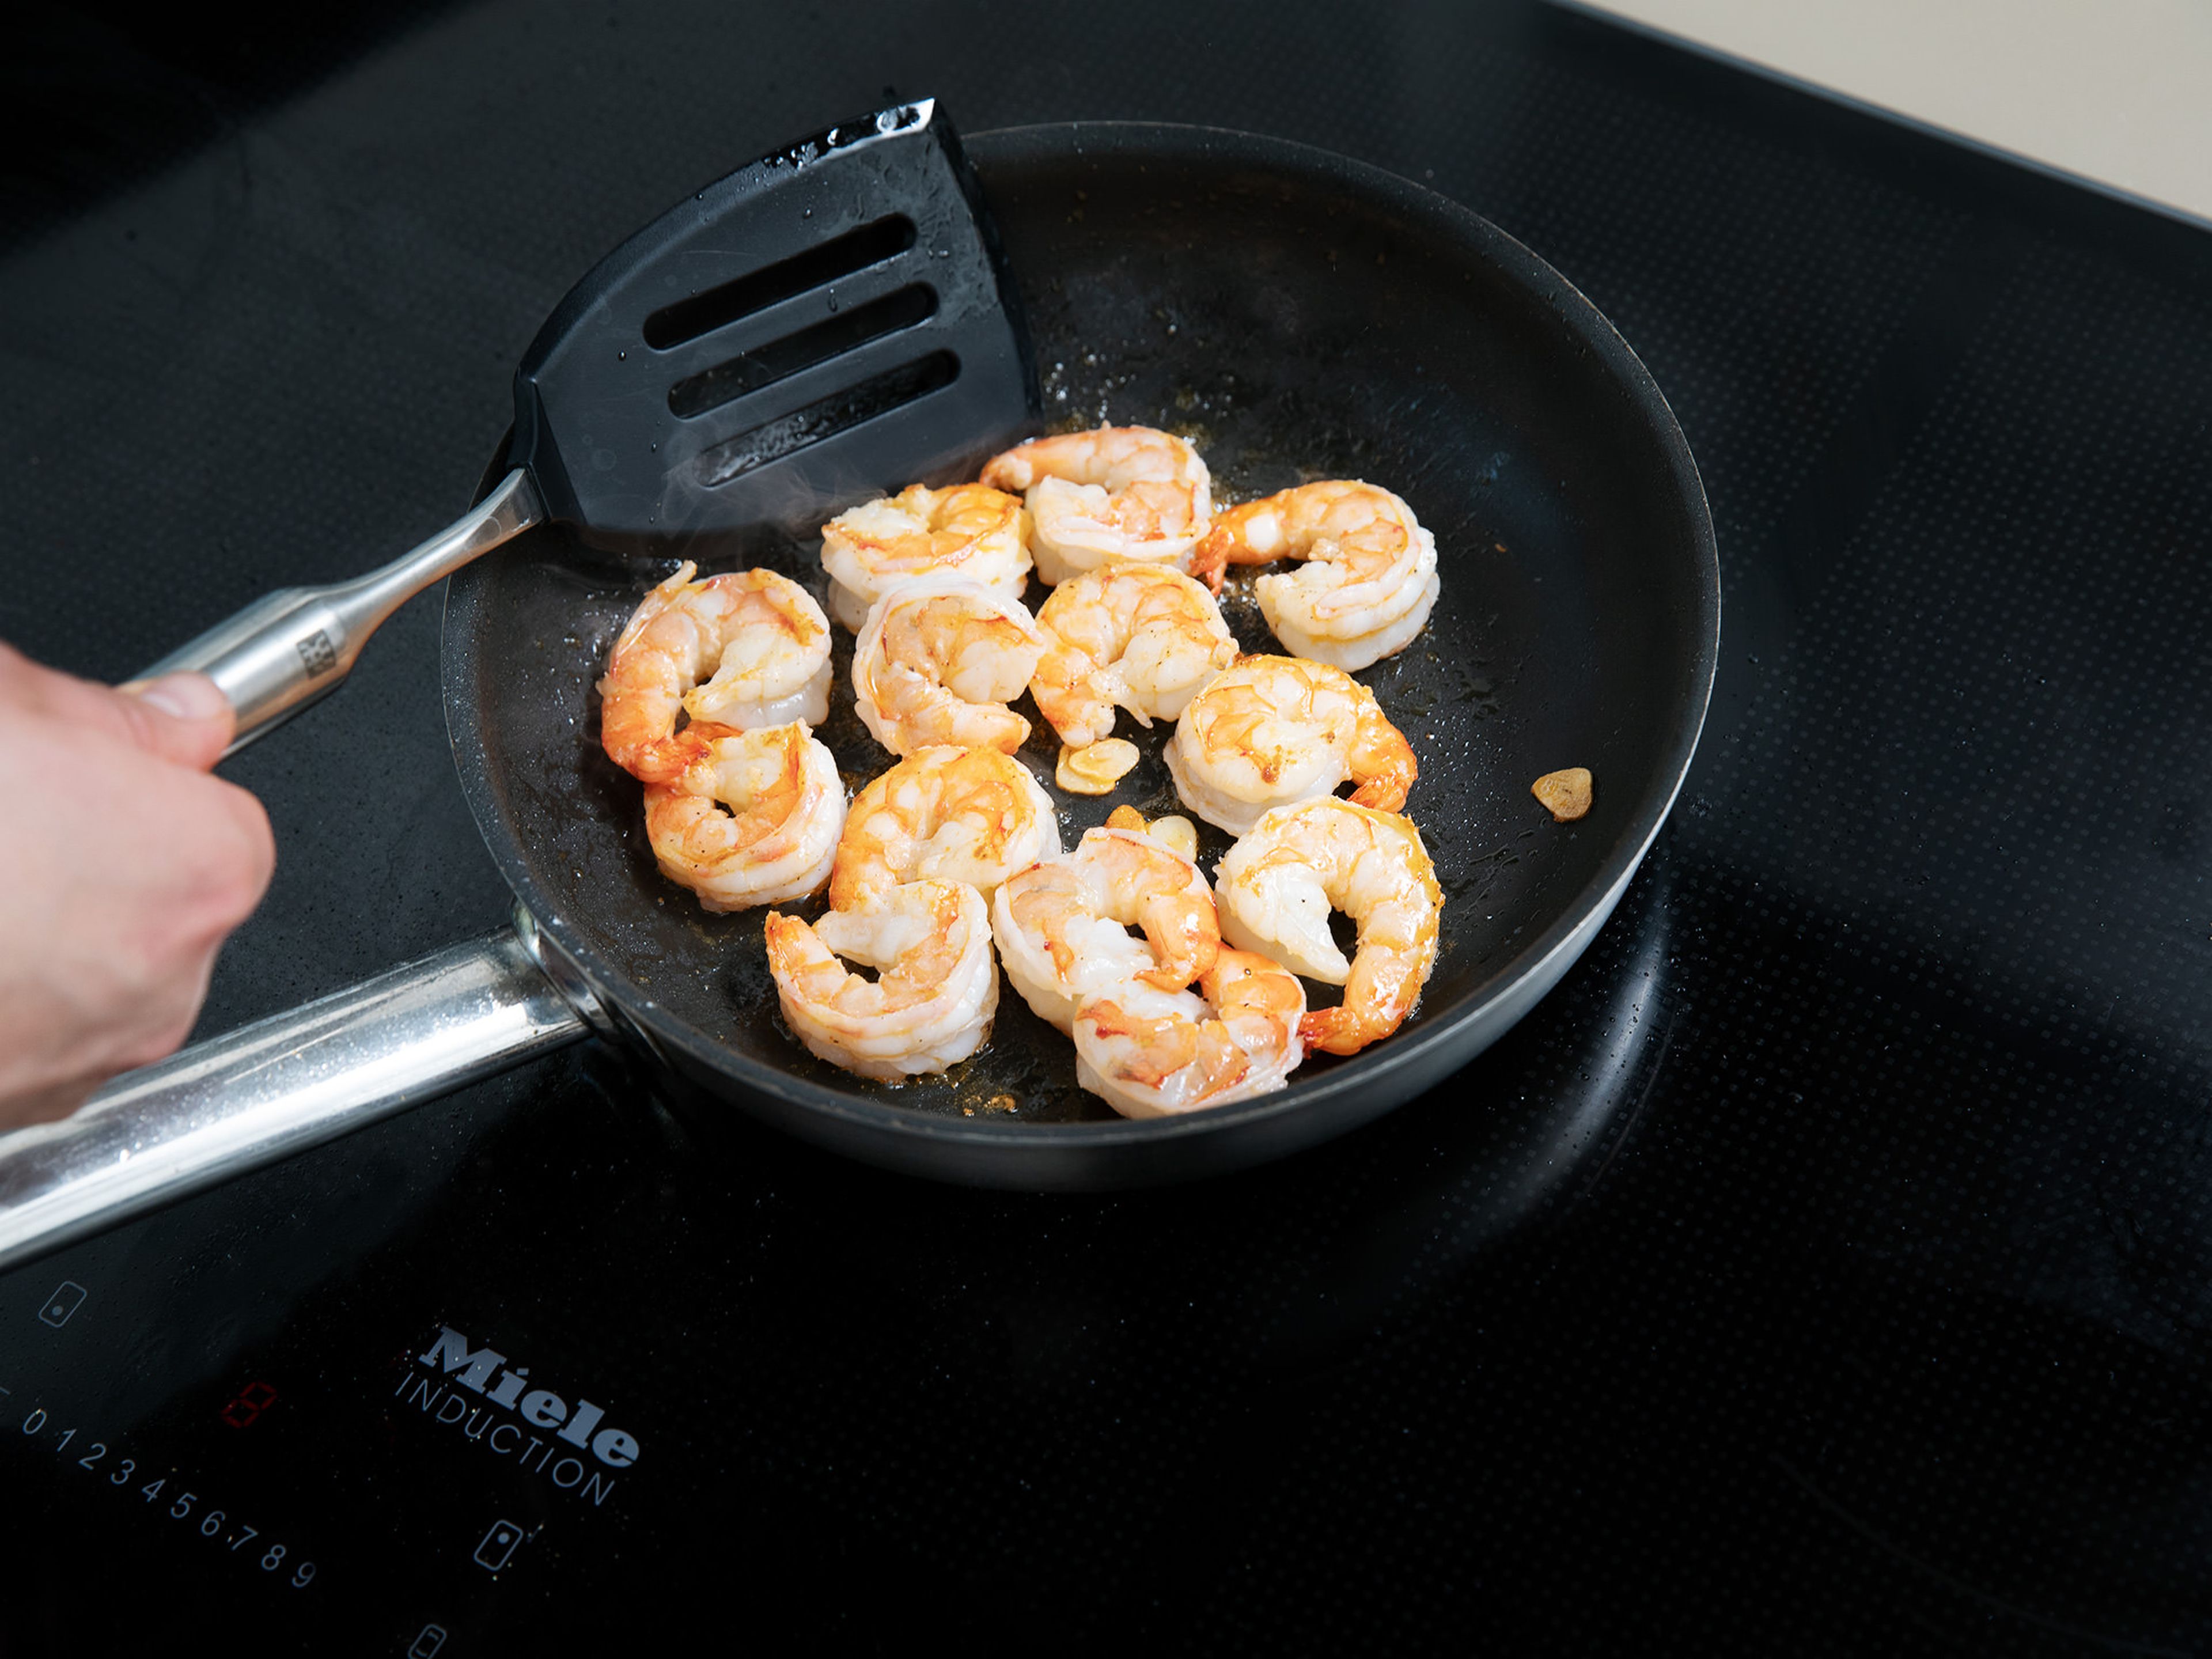 In a second frying pan, heat some toasted sesame oil and fry shrimp on medium-high heat for approx. 3 min. or until cooked through. Season with salt and pepper and toss in sweet chili sauce.